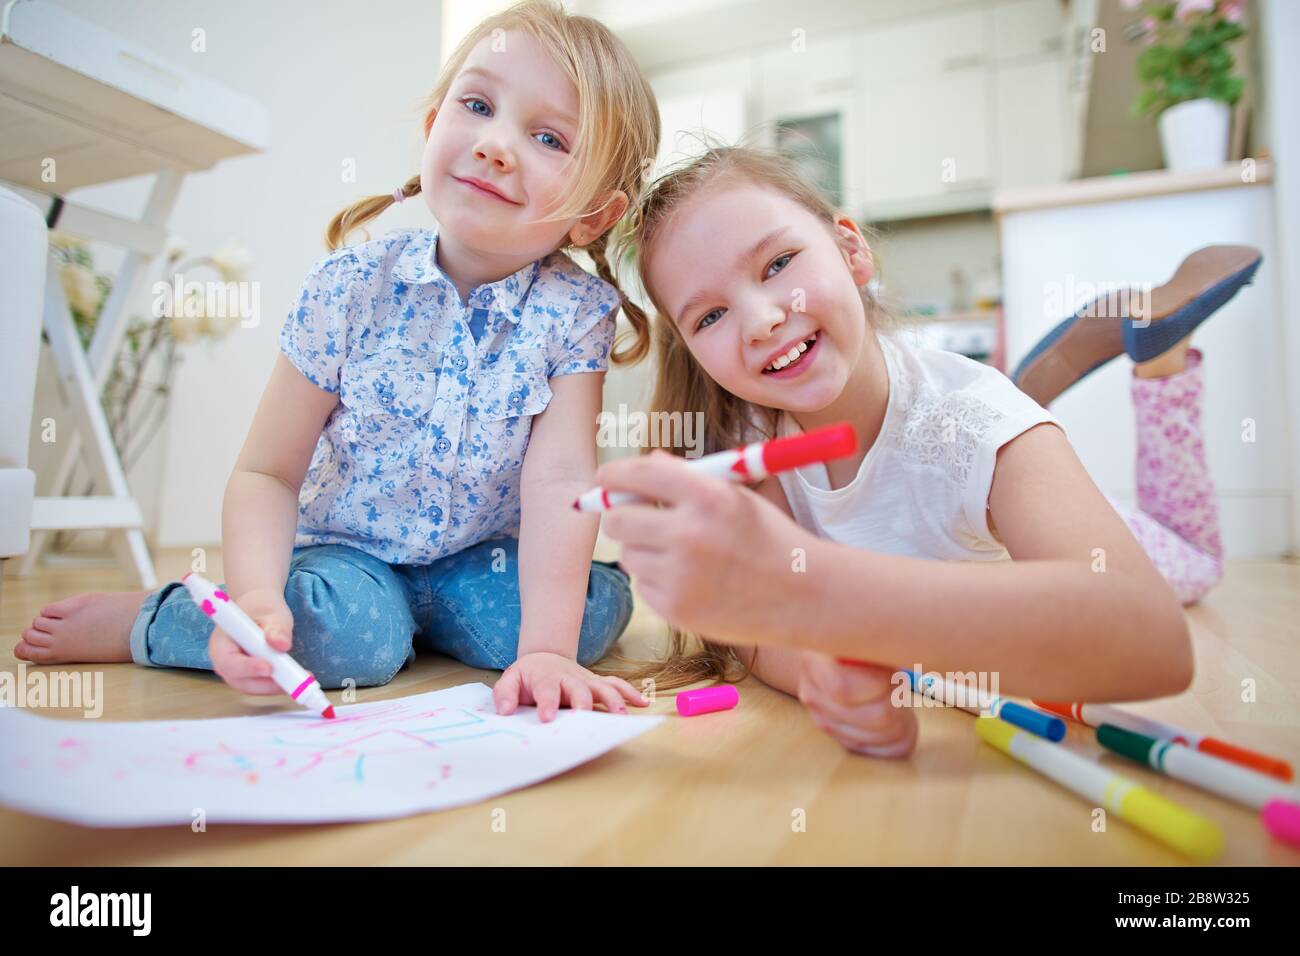 Children paint picture with felt pen on the floor at home Stock Photo